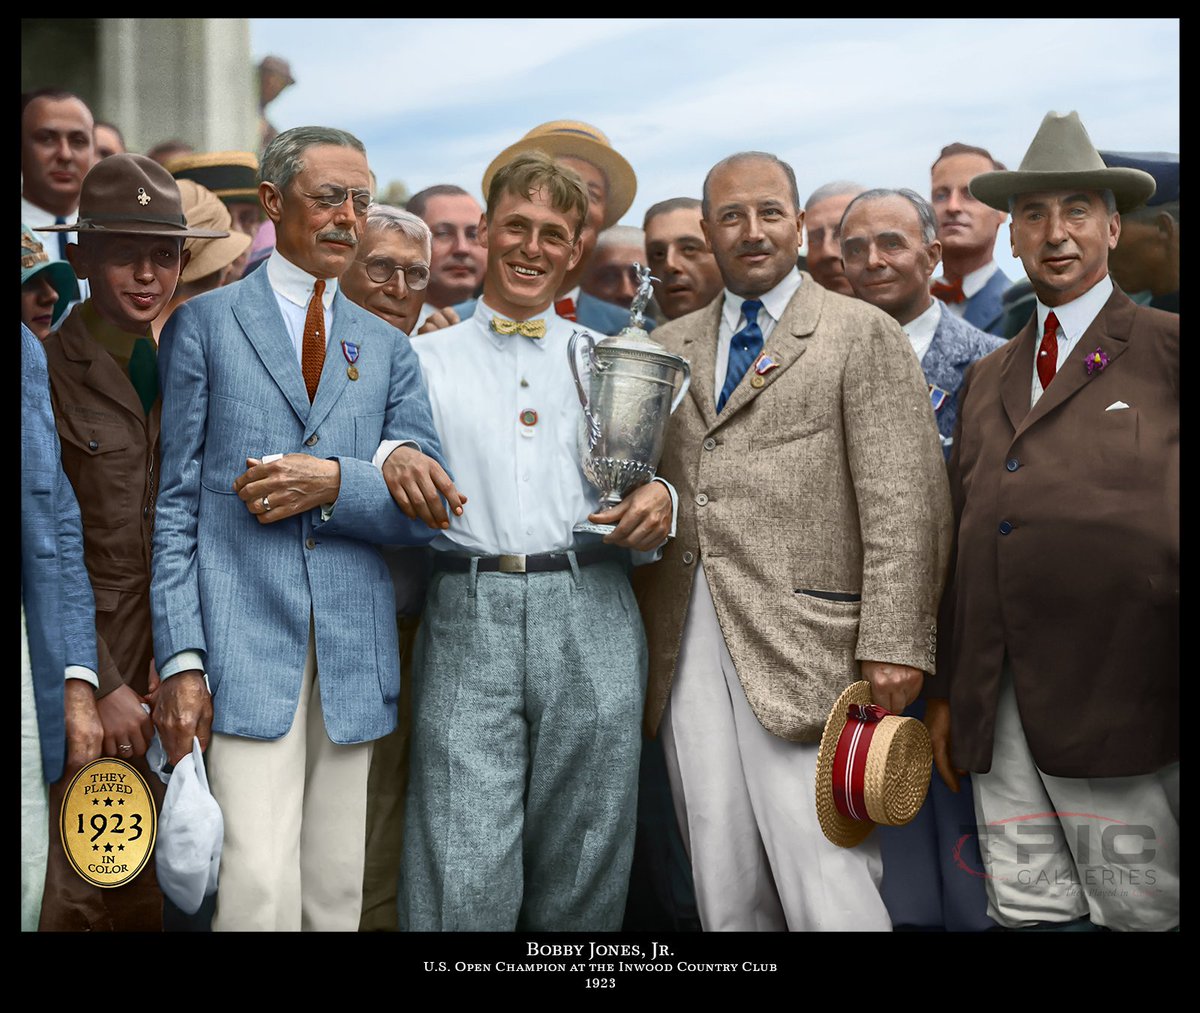 OTD 100 yrs ago, 7/15/1923, 21 yr old Bobby Jones captured his 1st Major Championship by winning the @usopengolf @InwoodCClub. The young amateur, brought to life in our color, defeated Bobby Cruickshank by 2 strokes in an 18-hole playoff. #theyplayedincolor @USGA @PGA https://t.co/KyrRRYHb5W